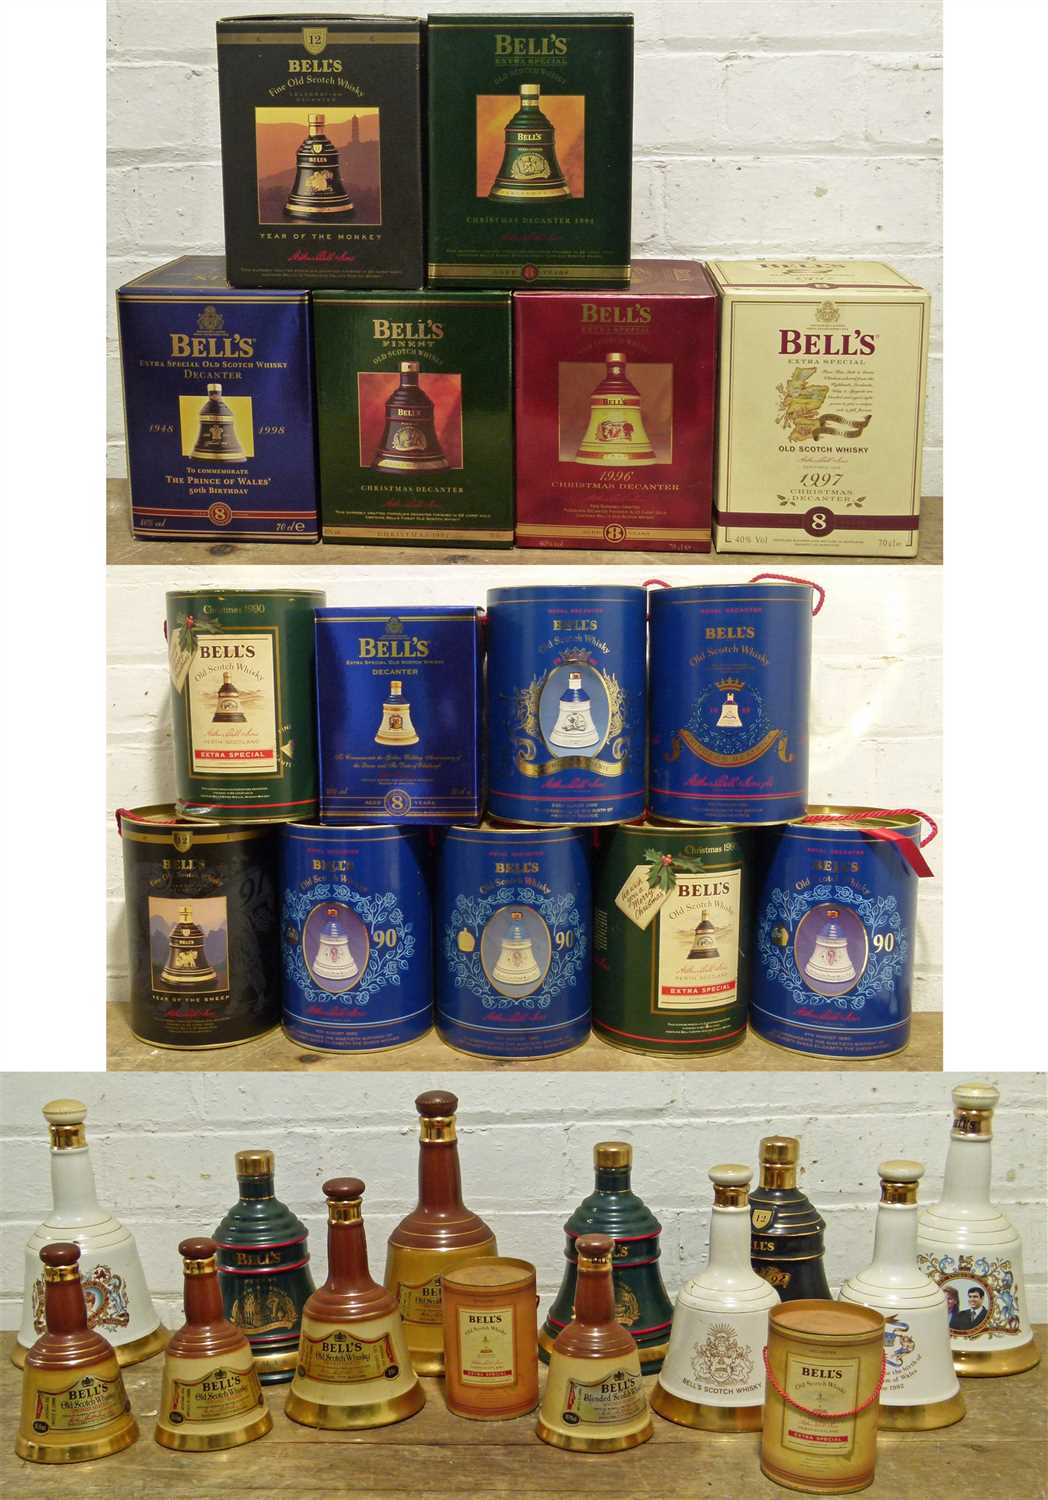 Lot 47 - 28 Bottles  (various sizes described within Lot) Bell’s Whisky Commemorative Decanters